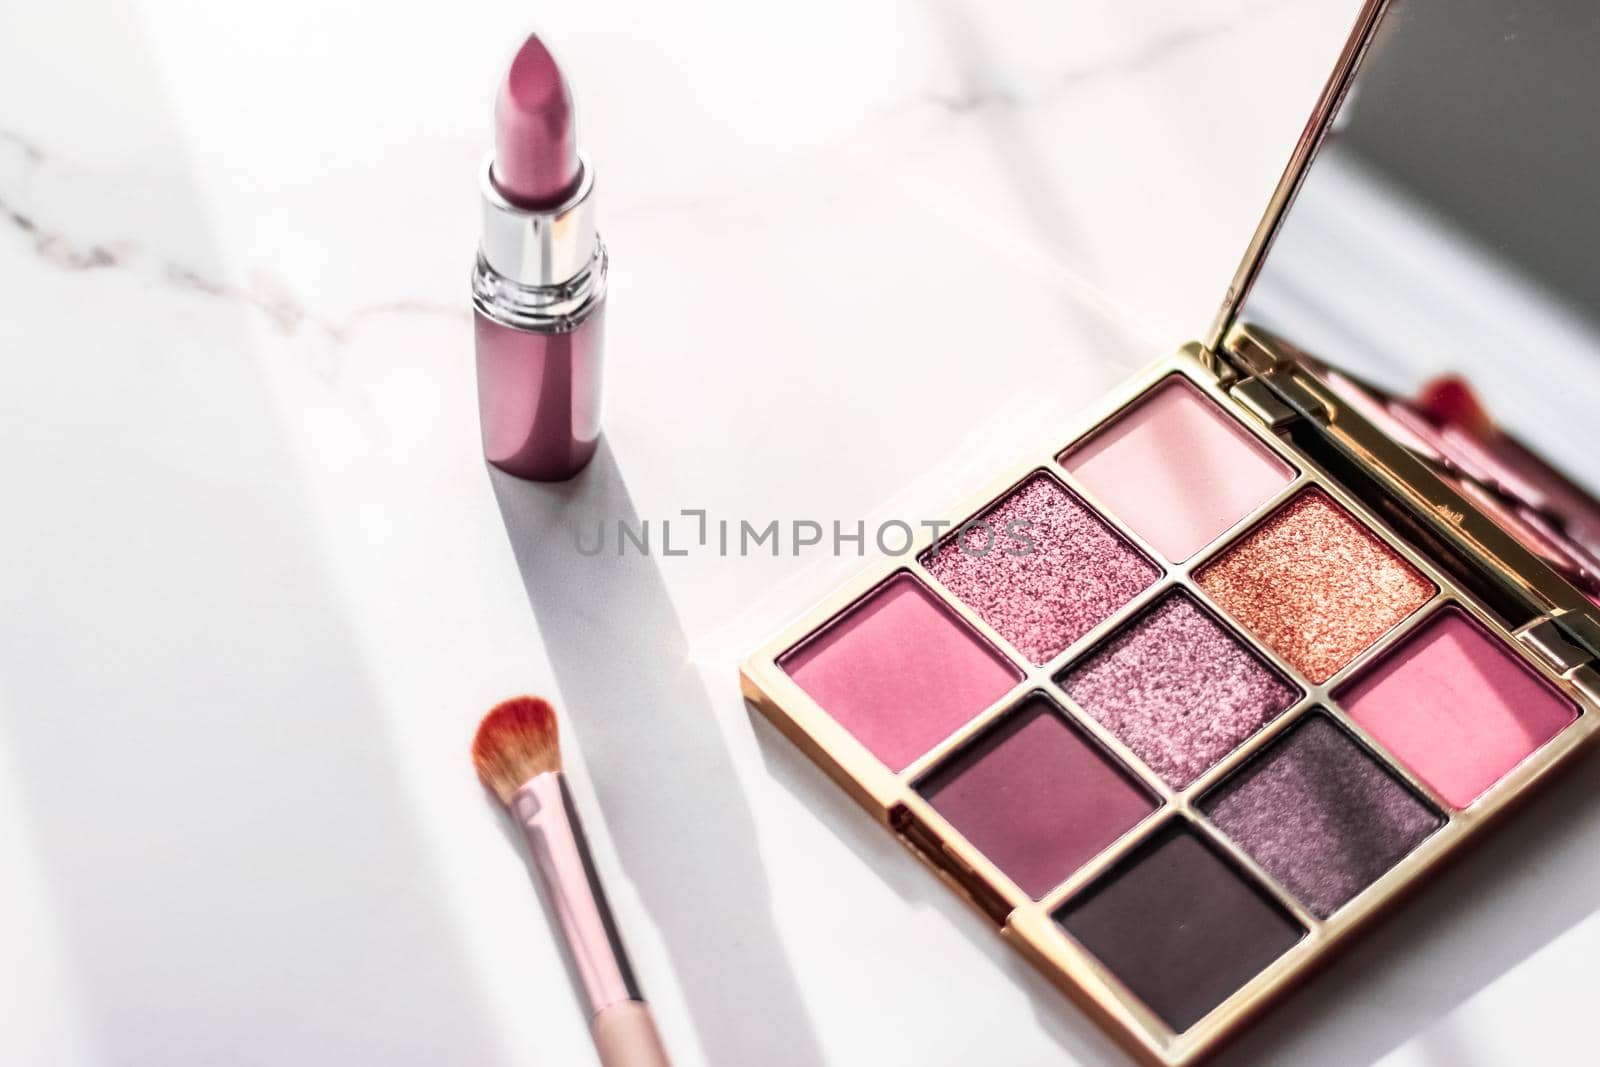 Cosmetic branding, girly and glamour concept - Cosmetics, makeup products set on marble vanity table, lipstick, eyeshadows and make-up brush for luxury beauty and fashion brand ads, holiday design